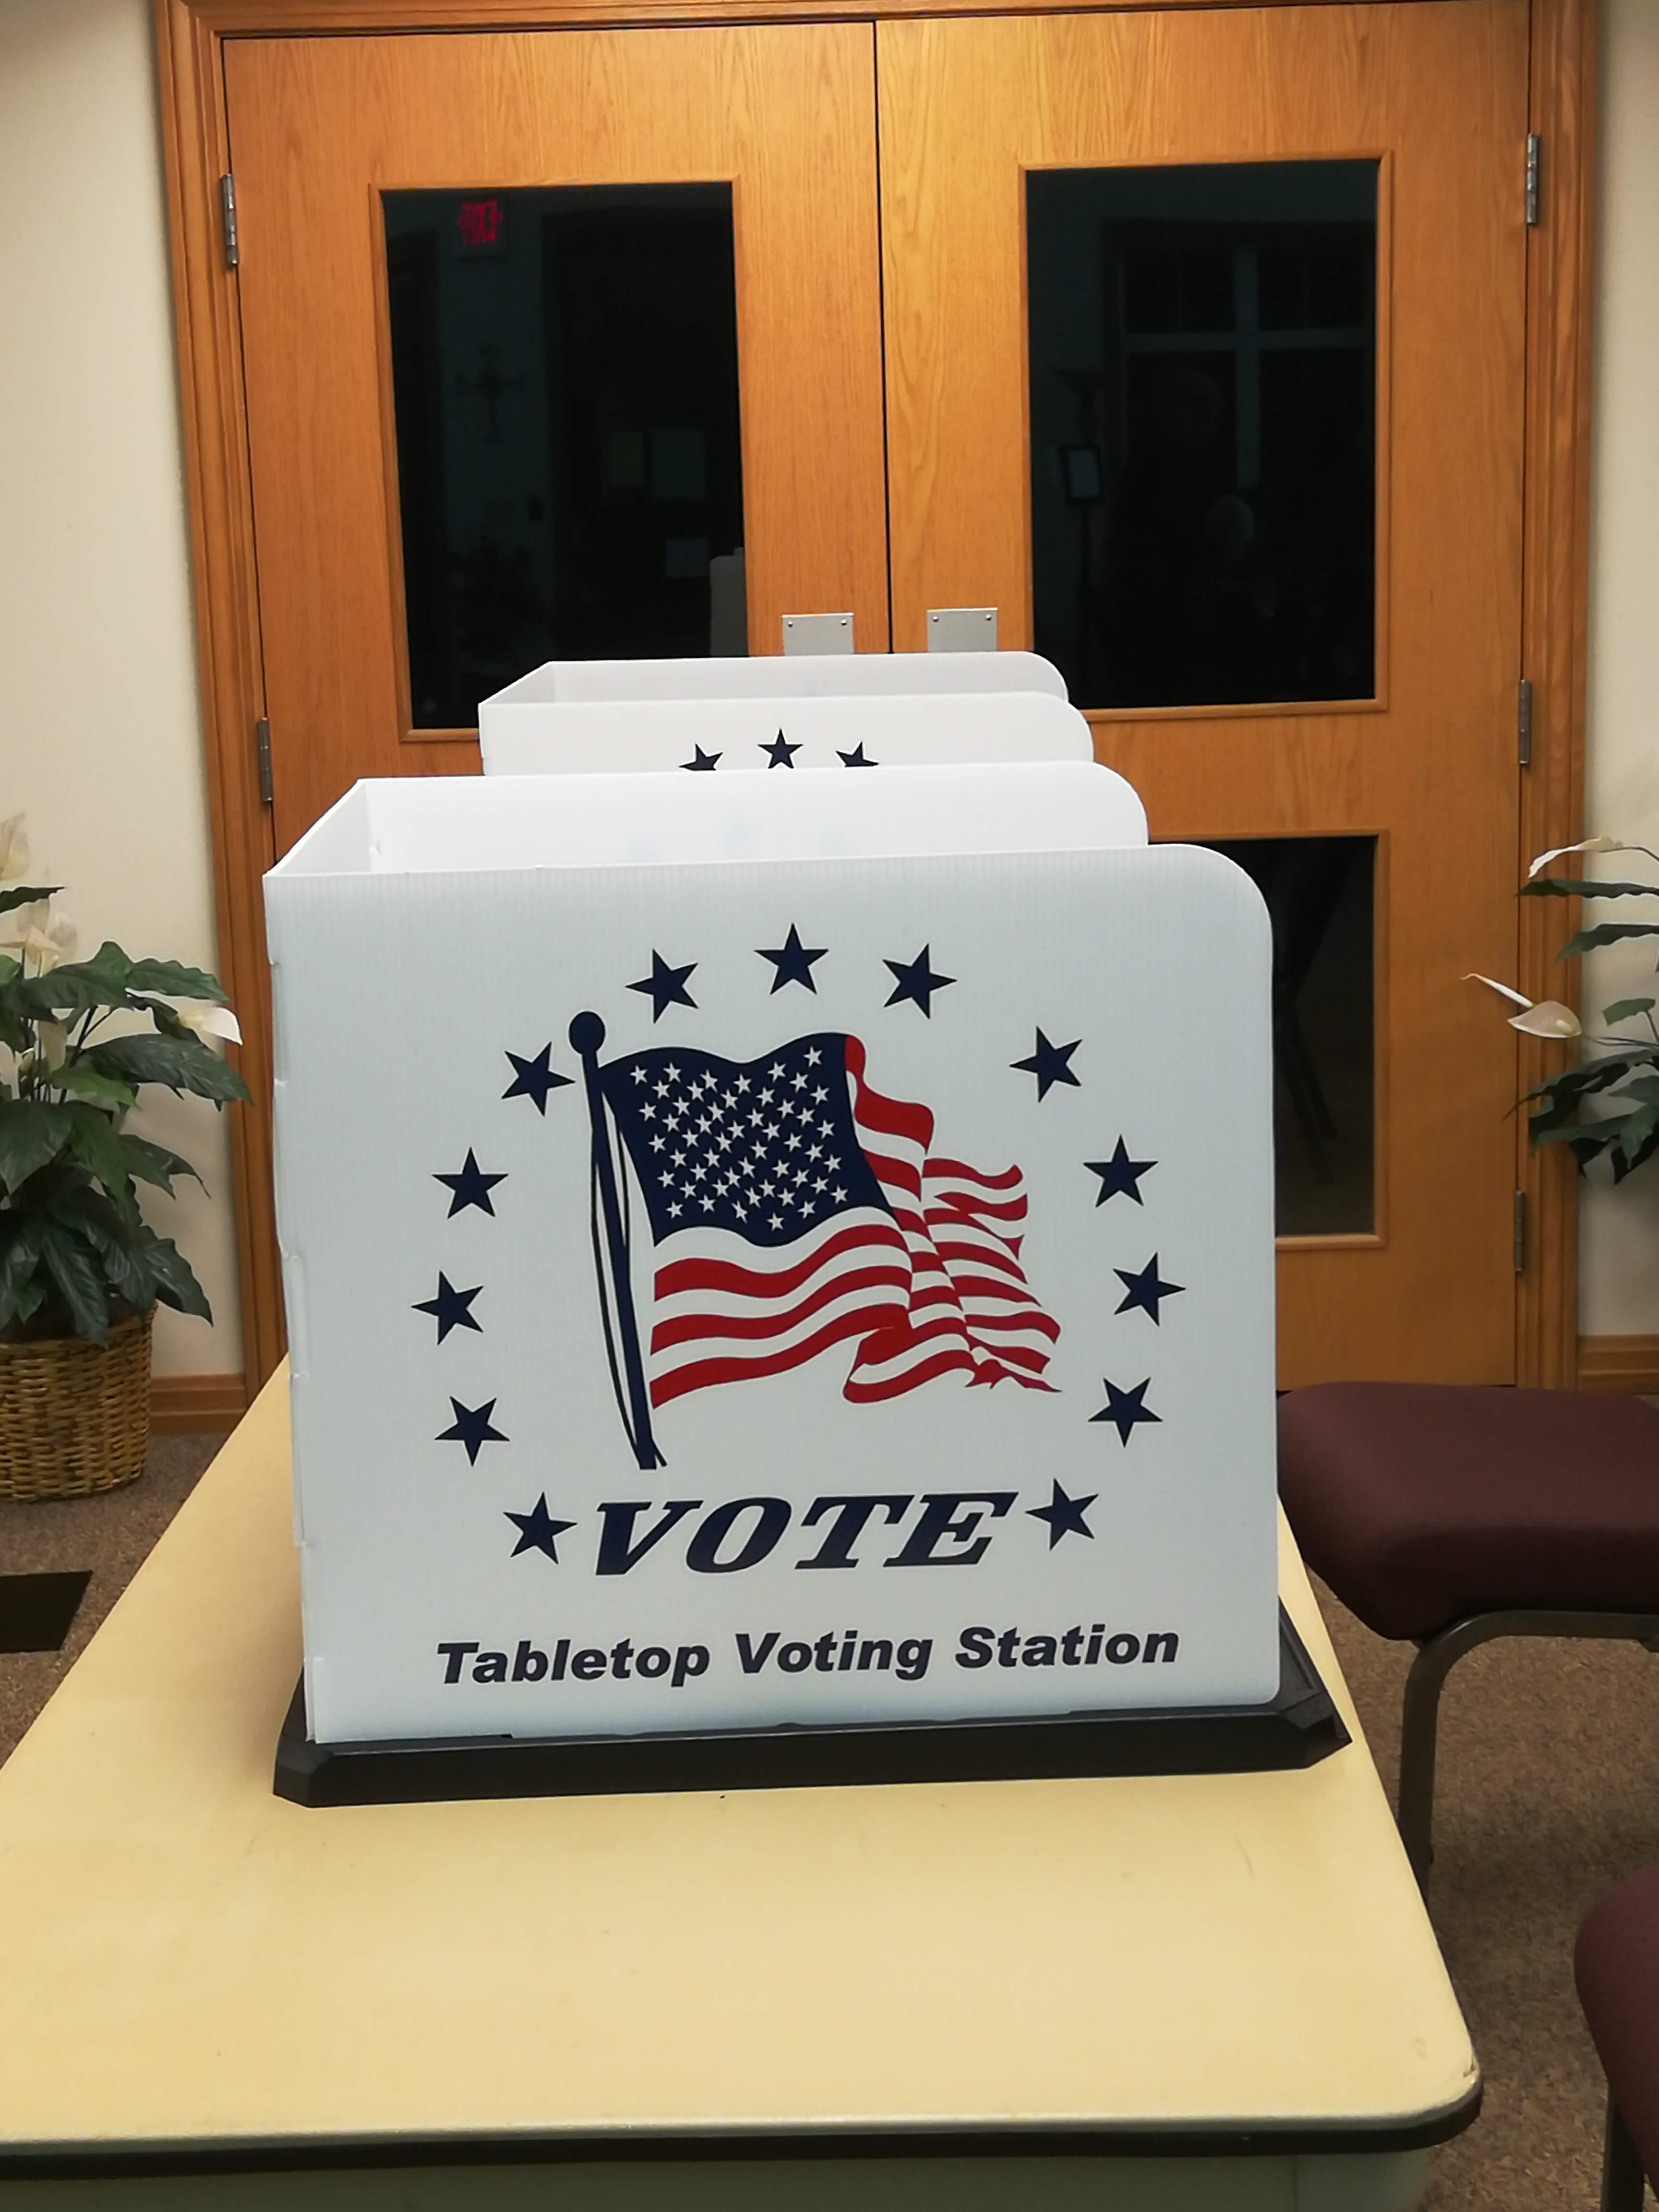 Action Alert – Removing the Deceased from Voter Rolls